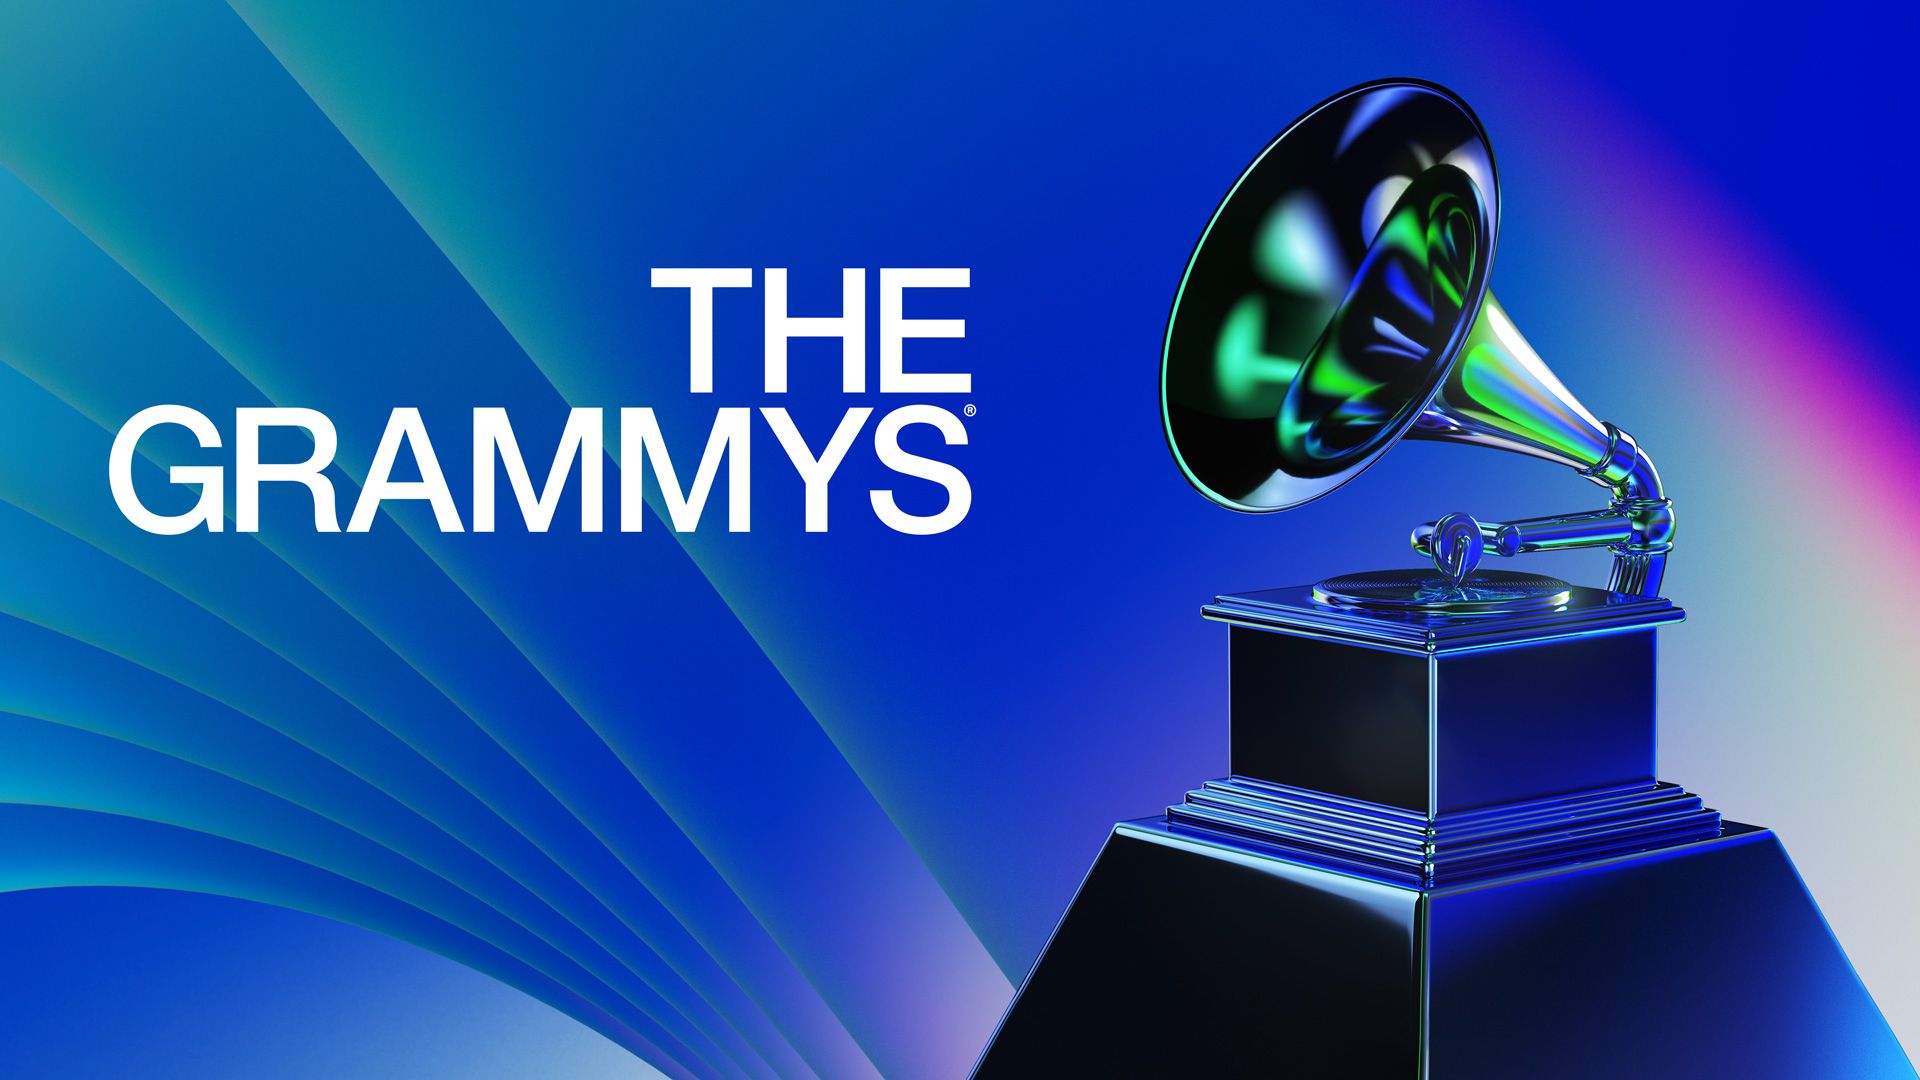 Grammys live stream 2022 how to watch the 64th annual music awards